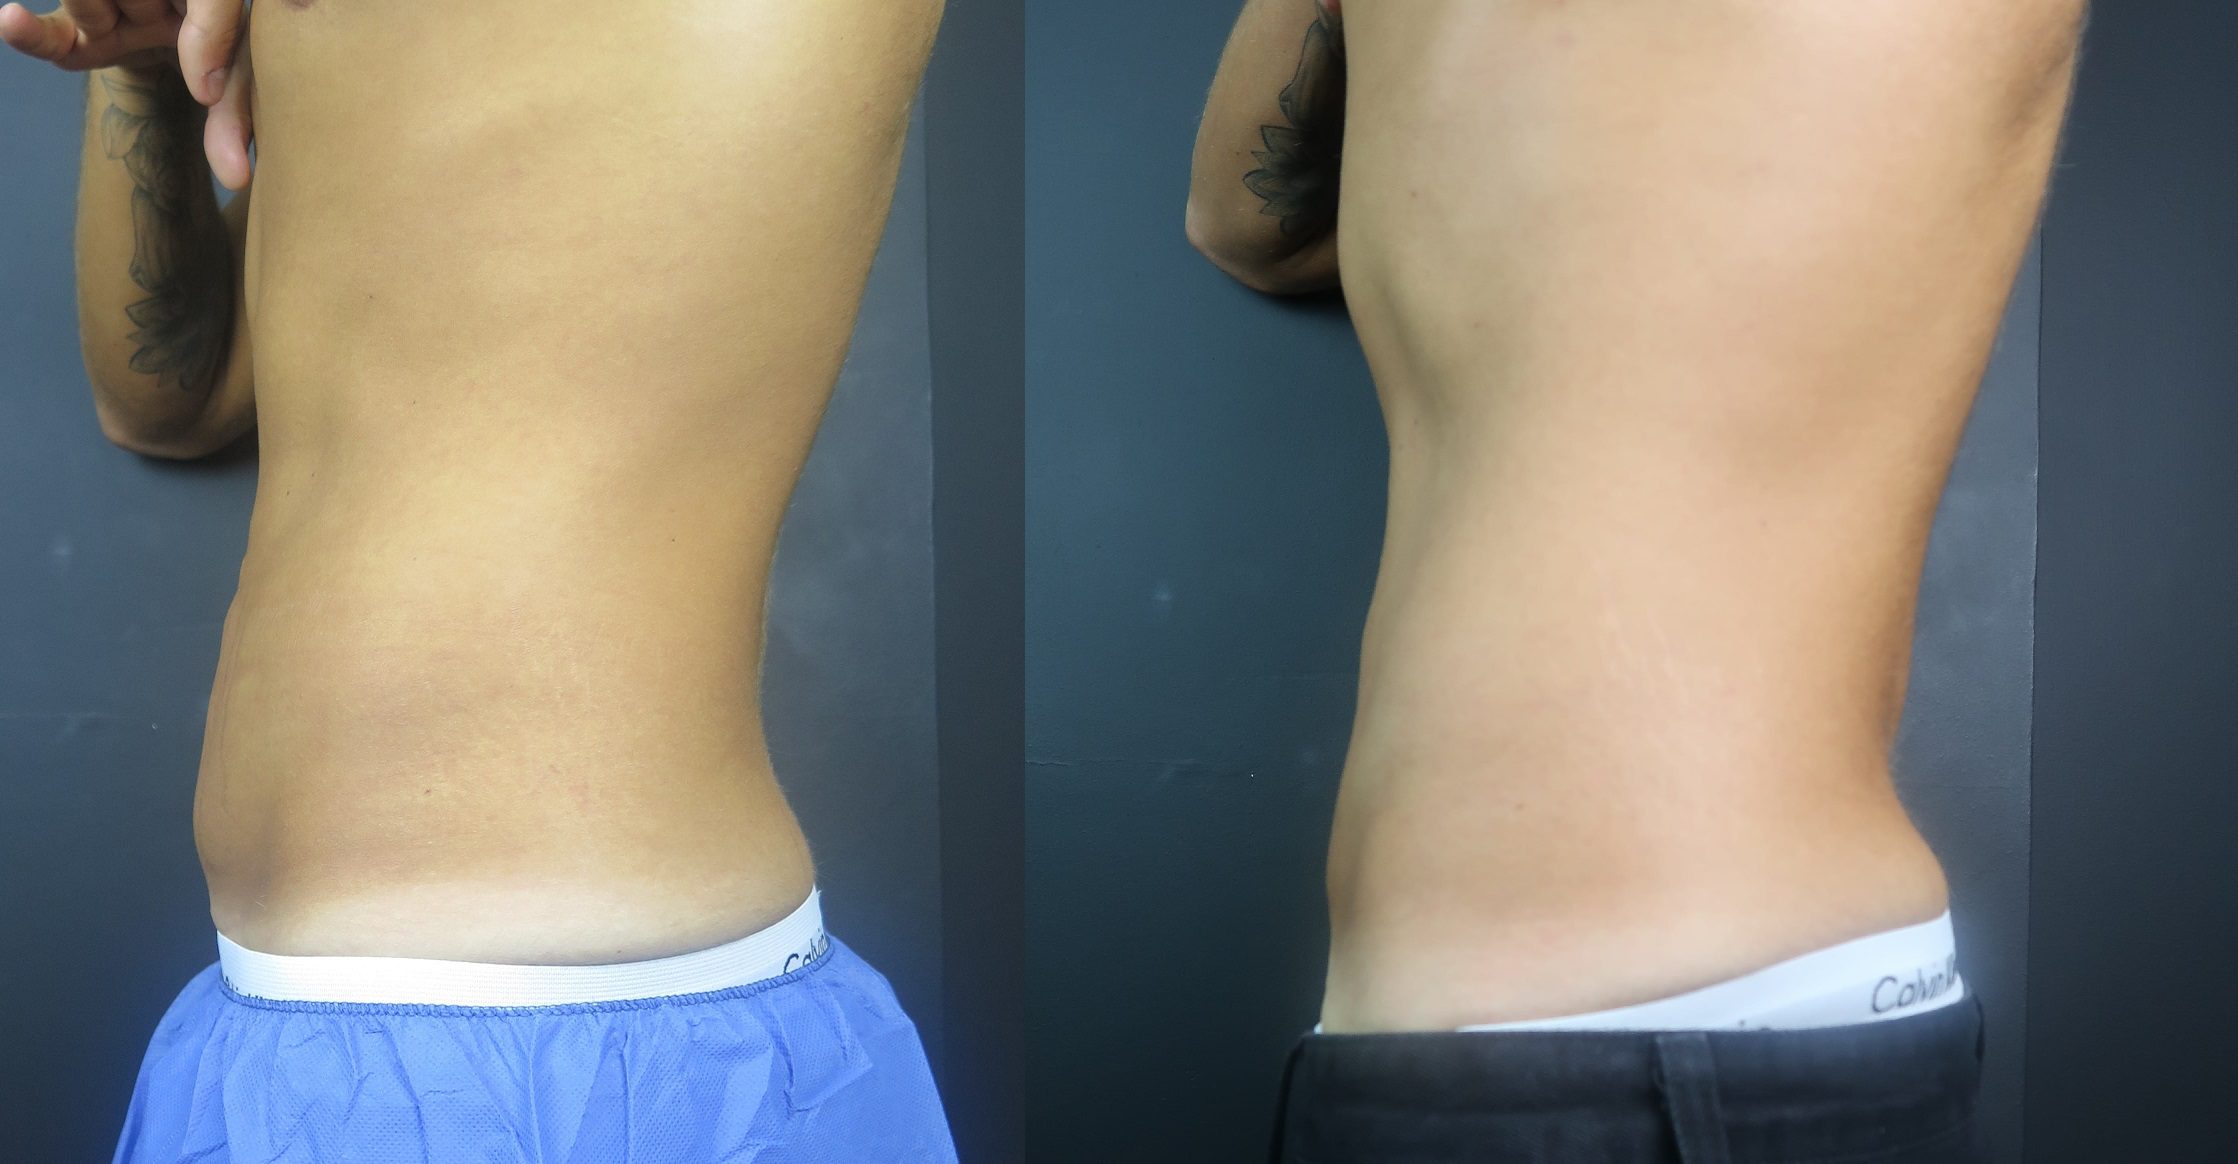 coolsculpting fat freezing belly fat before and after